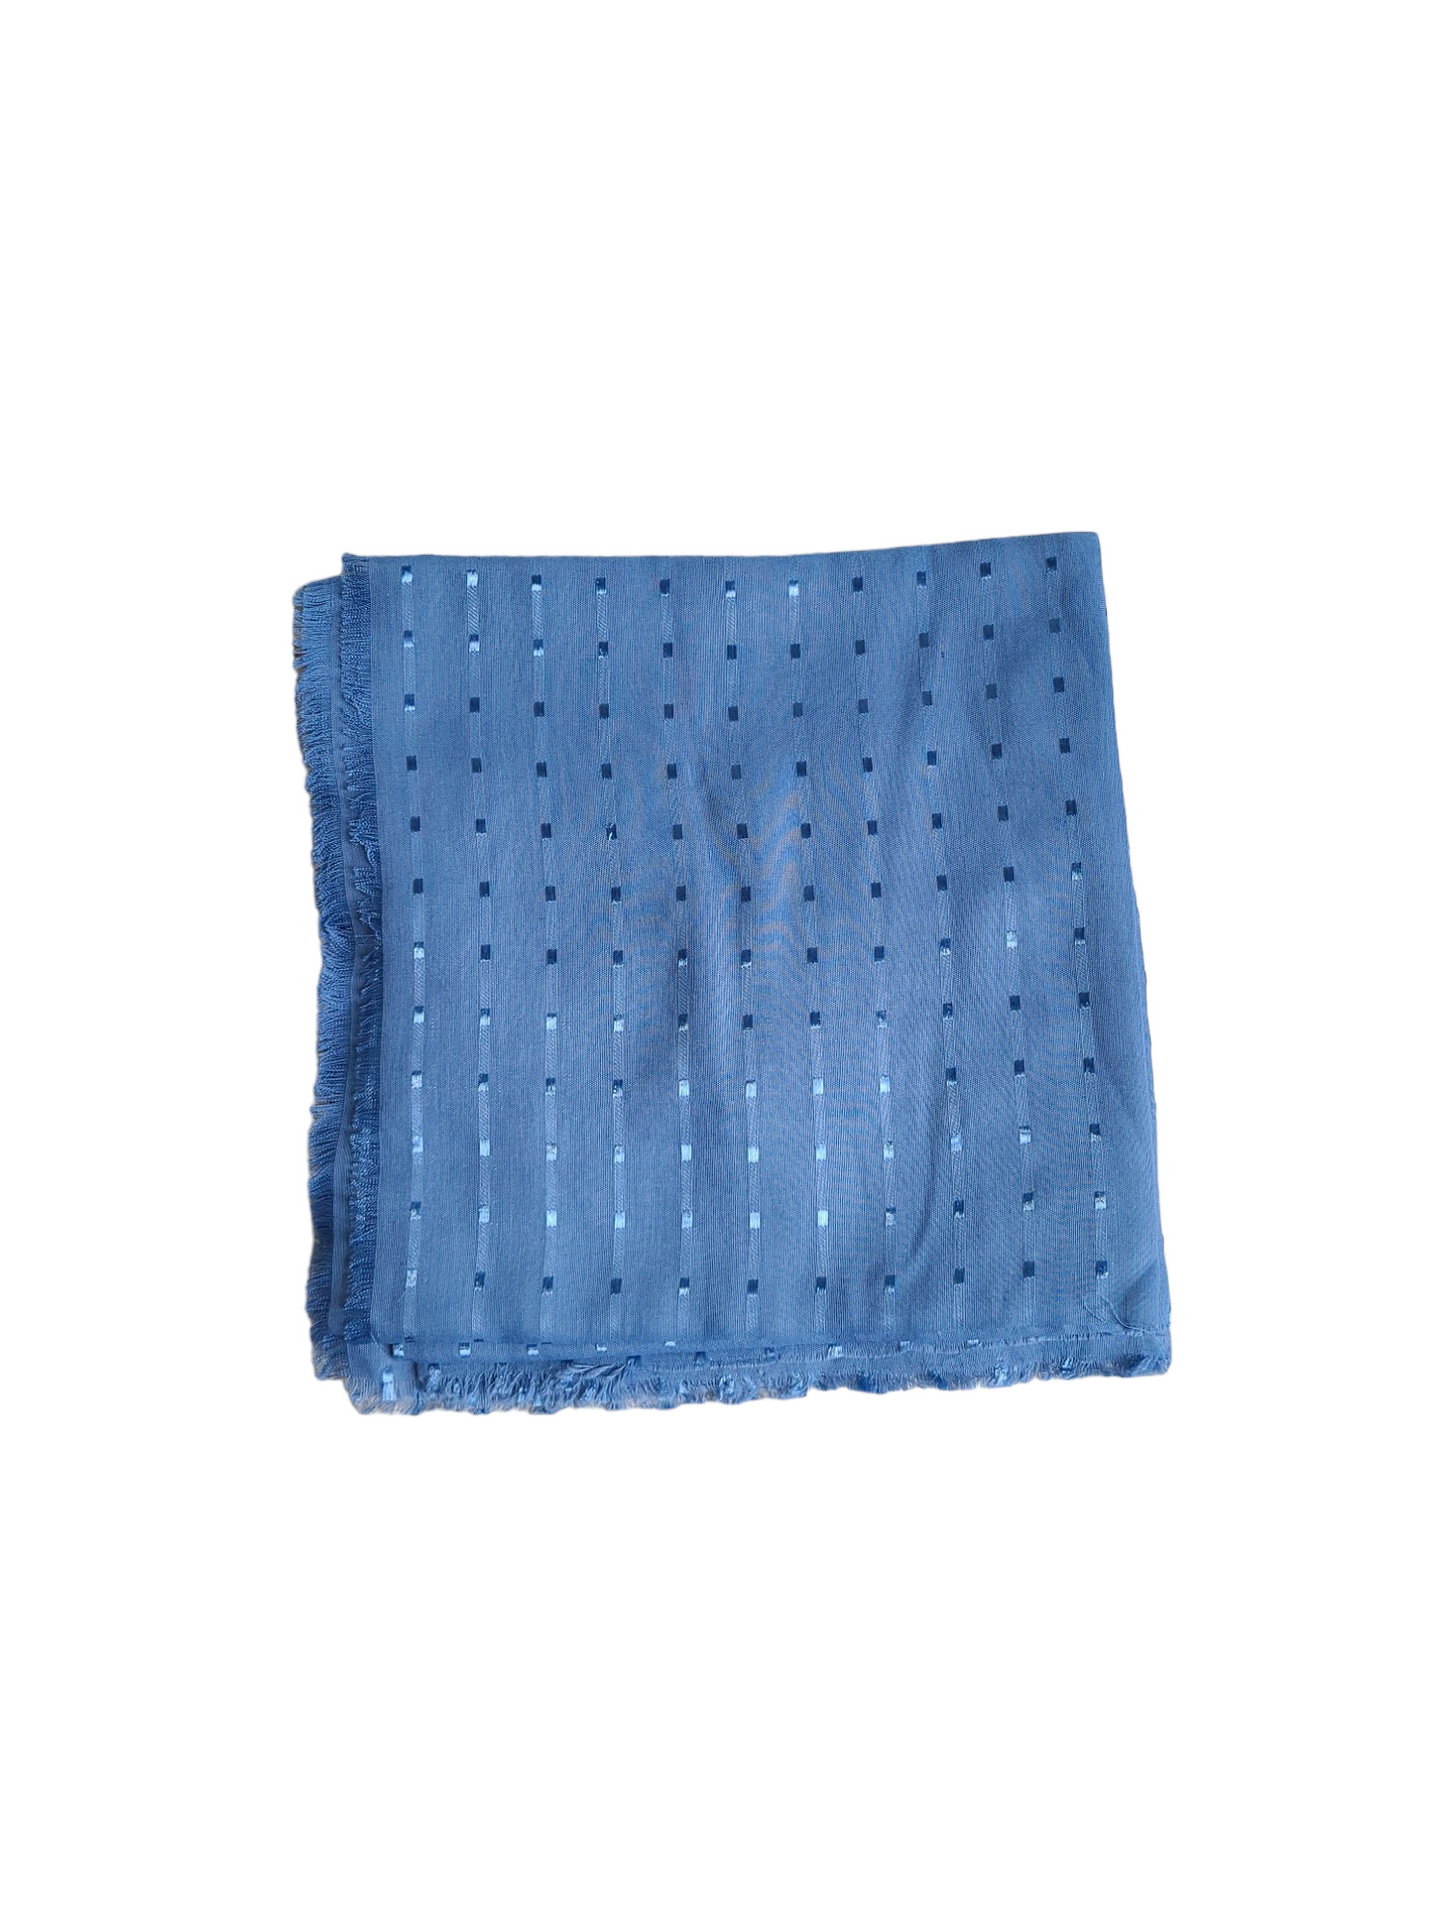 Solid Dotted Square Scarf - Keter Hayofi Mitpachot